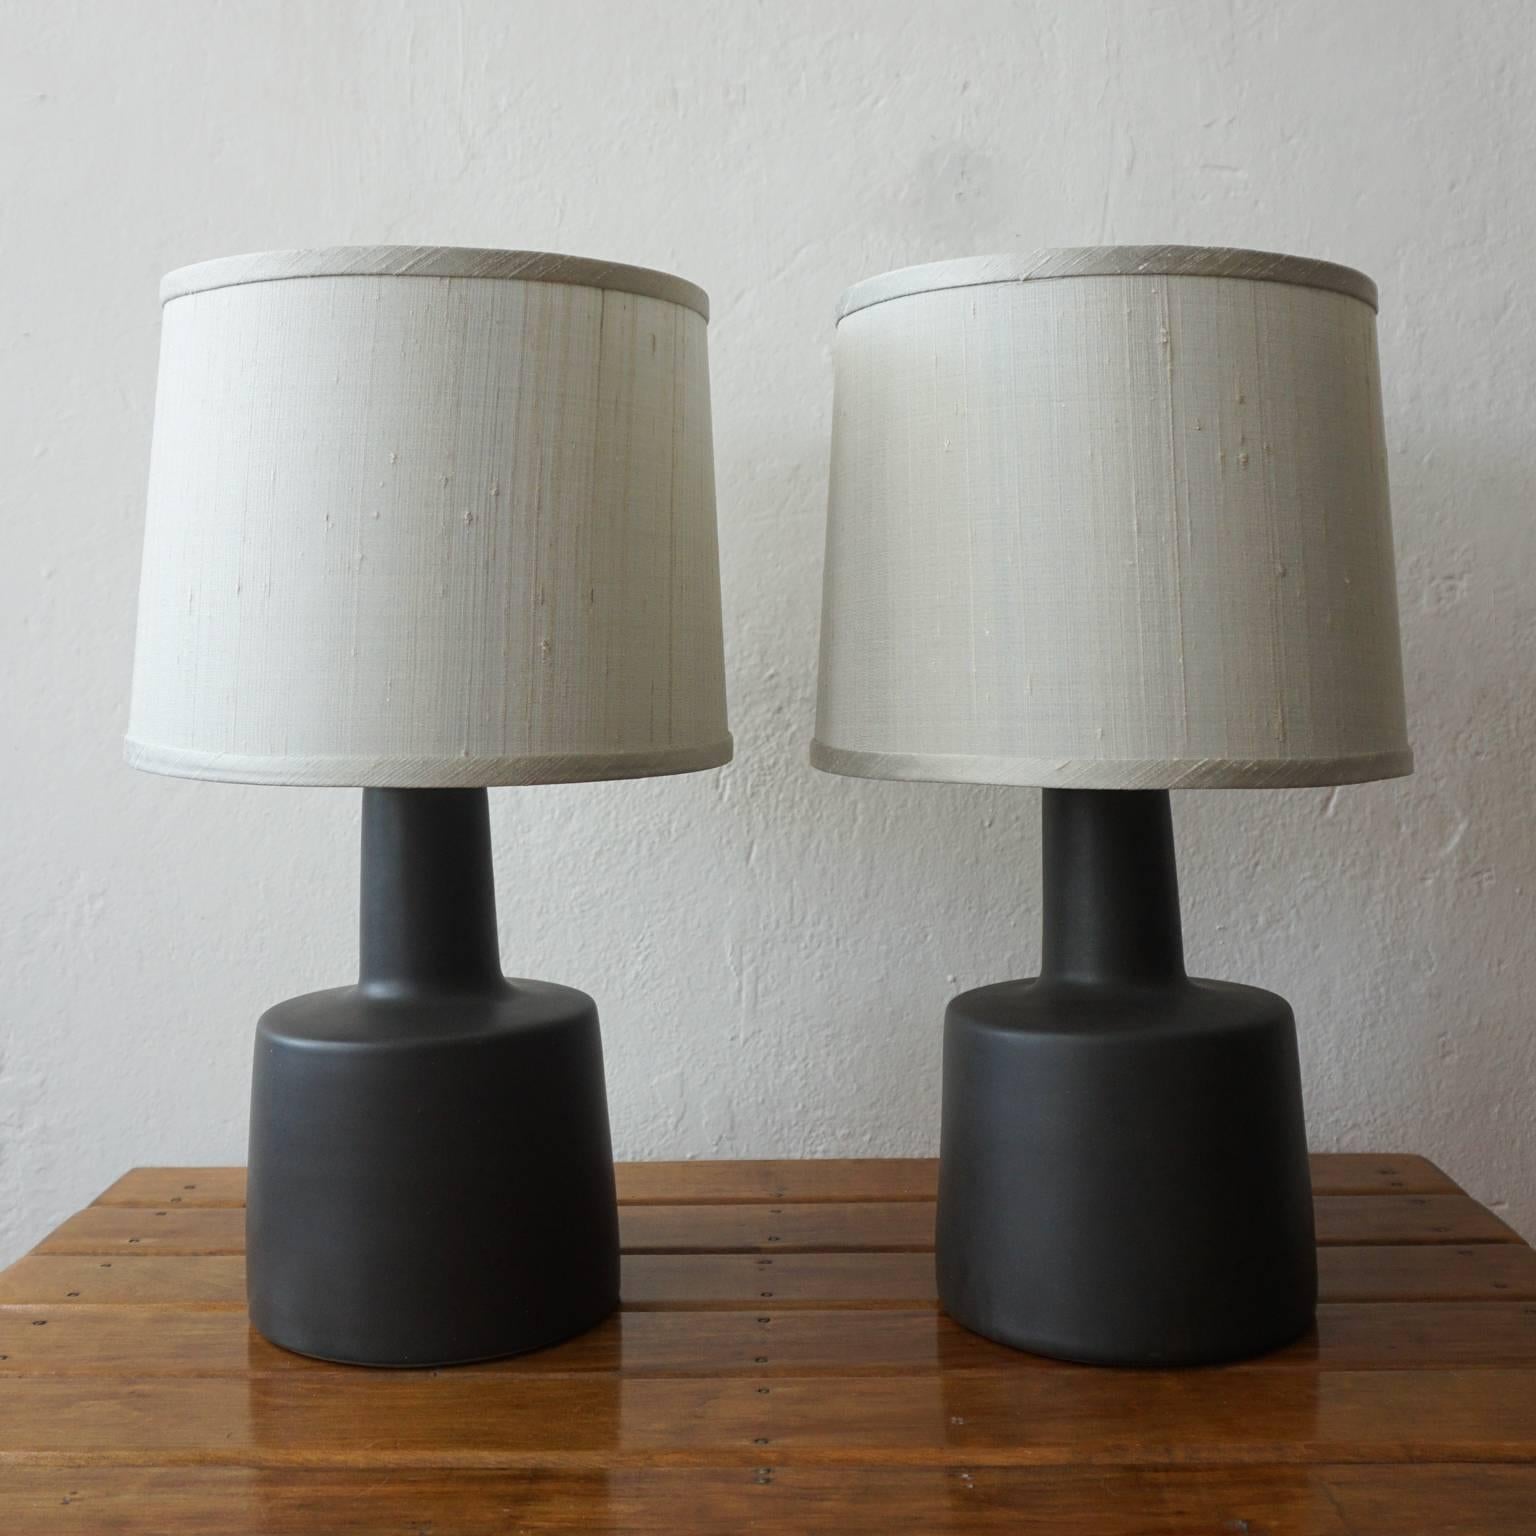 Pair of ceramic table lamps by Jane and Gordon Martz for their company, Marshall Studios. Charcoal base with new light gray shades. Signed in the clay.